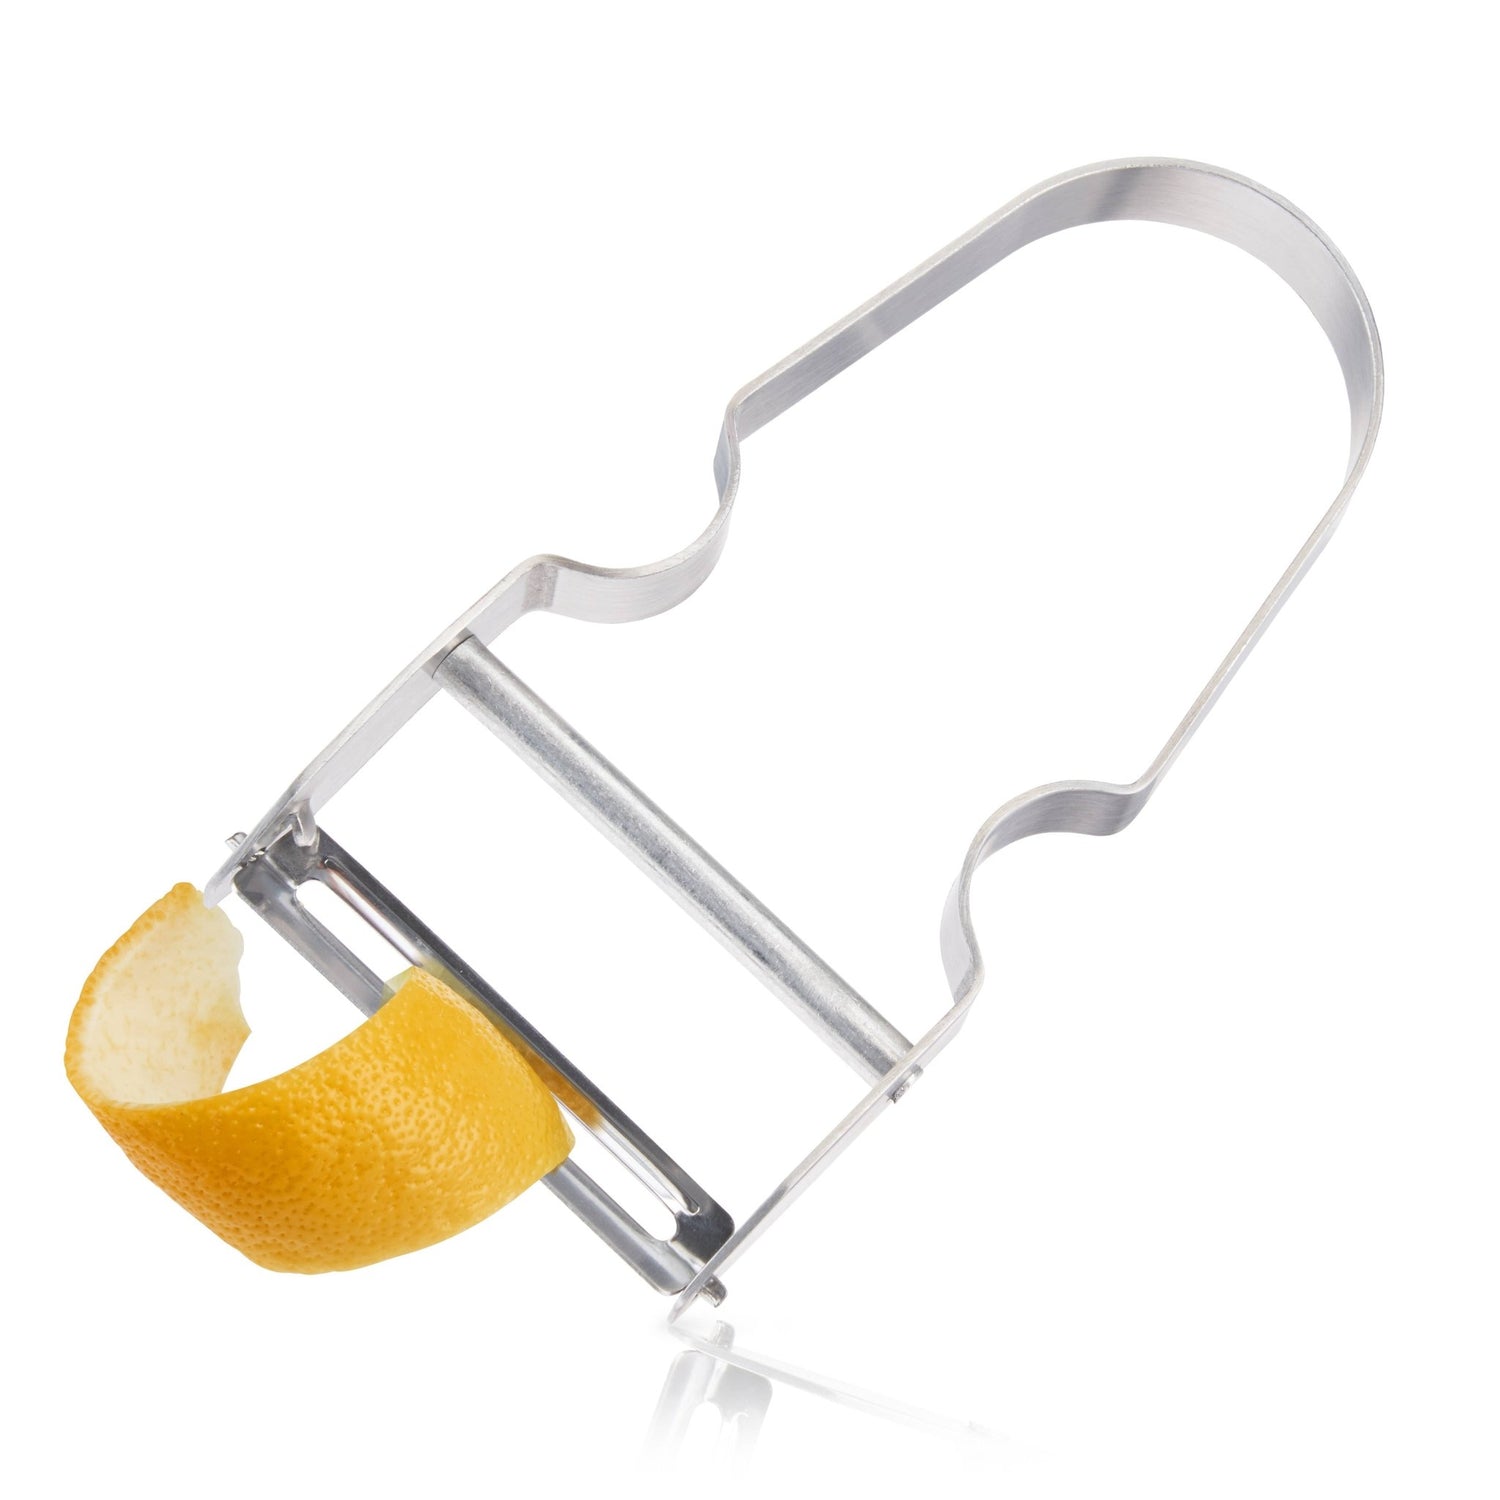 Professional: Stainless Steel Citrus Peeler - Durham DistilleryCocktail Shakers &amp; ToolsShop for Pickup